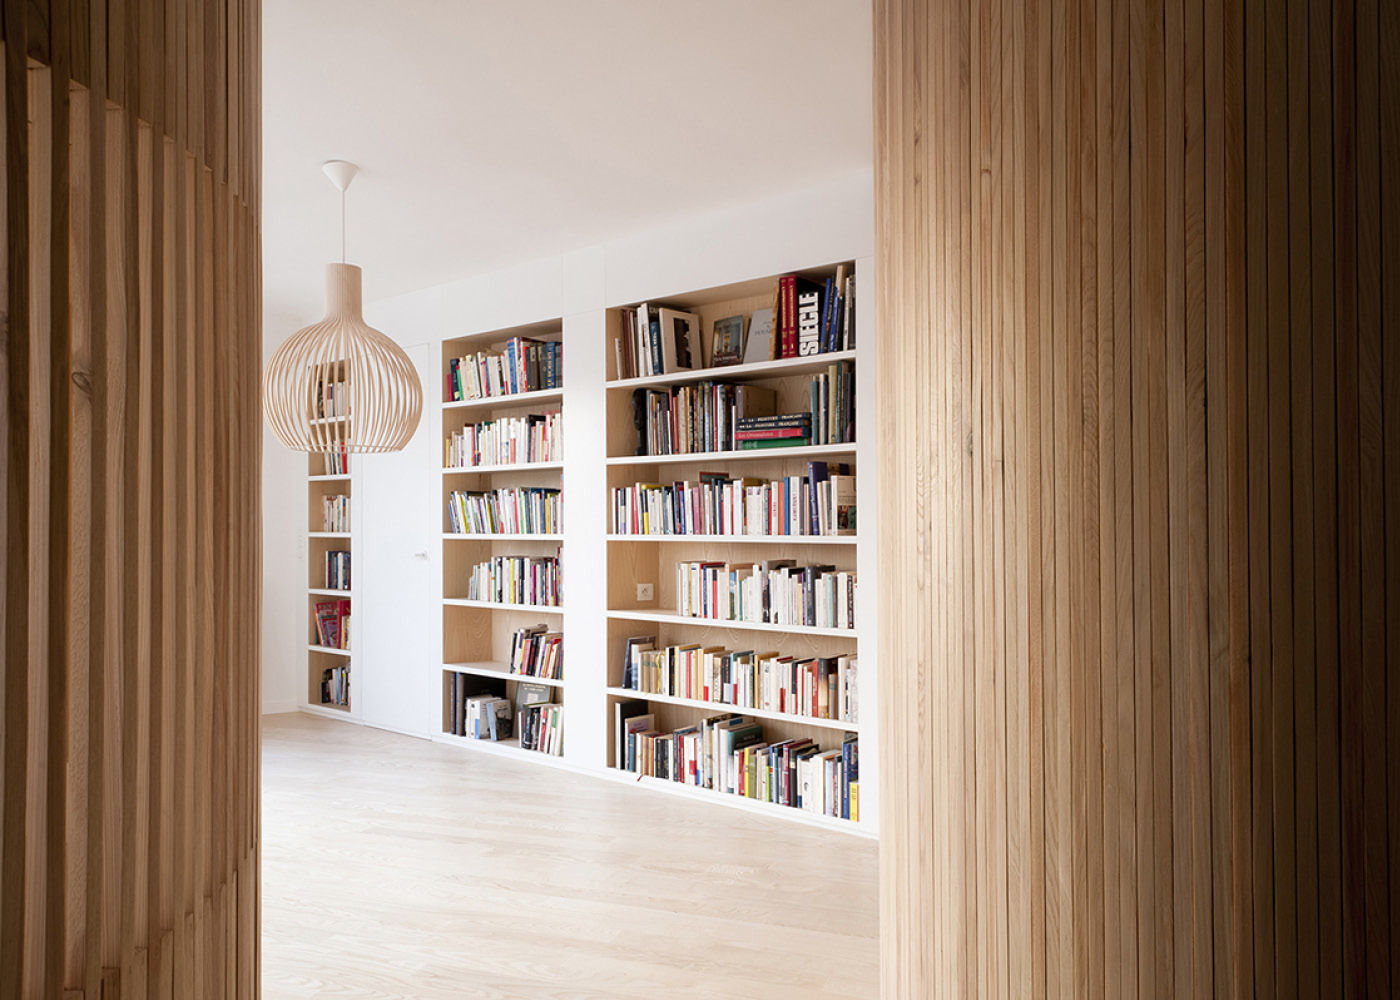 Flat N°4. A small ap, Julien Joly Architecture Julien Joly Architecture Ruang Makan Modern